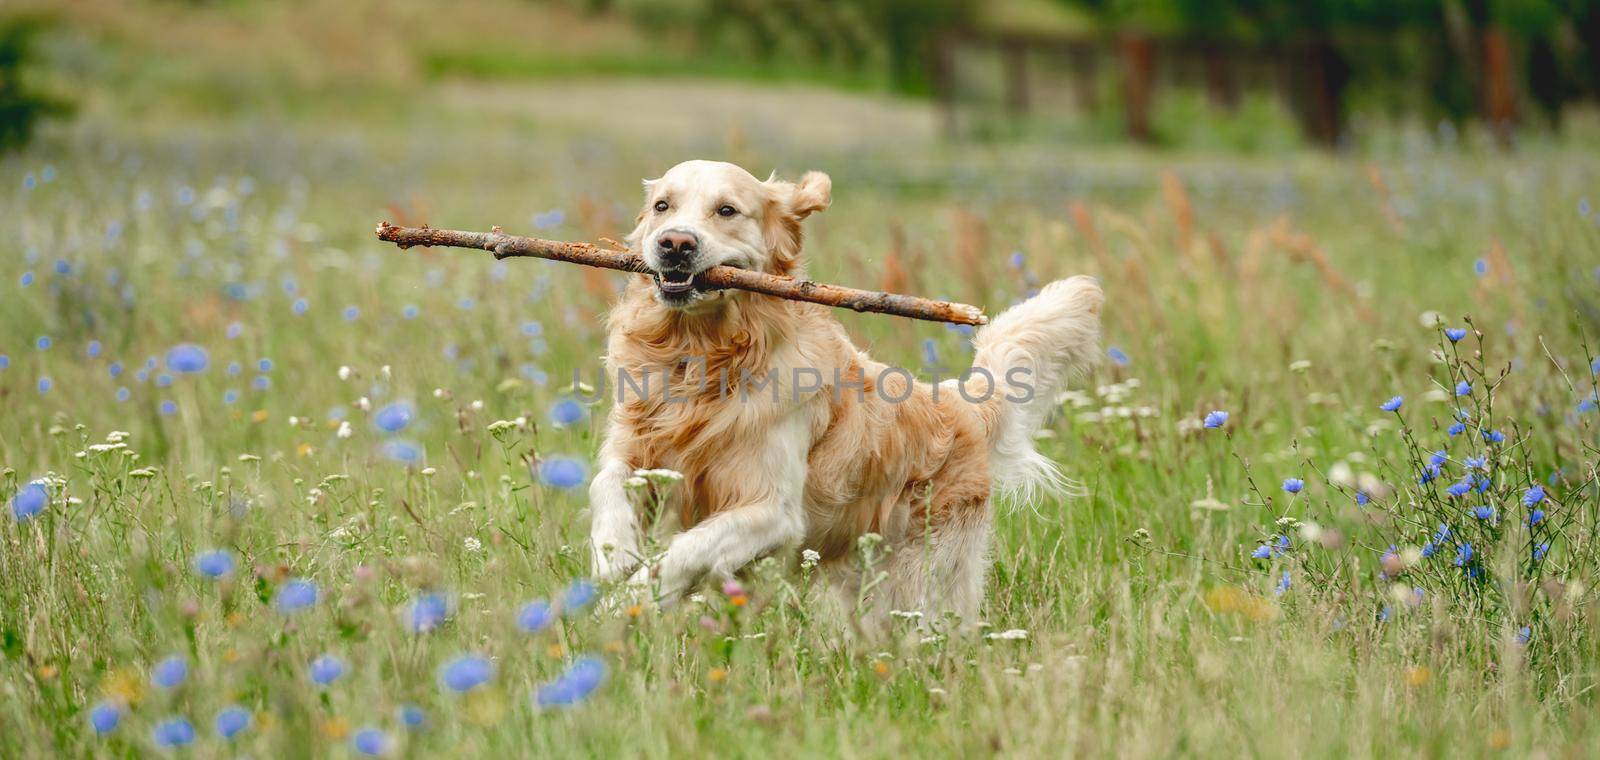 Cute dog running with stick by tan4ikk1